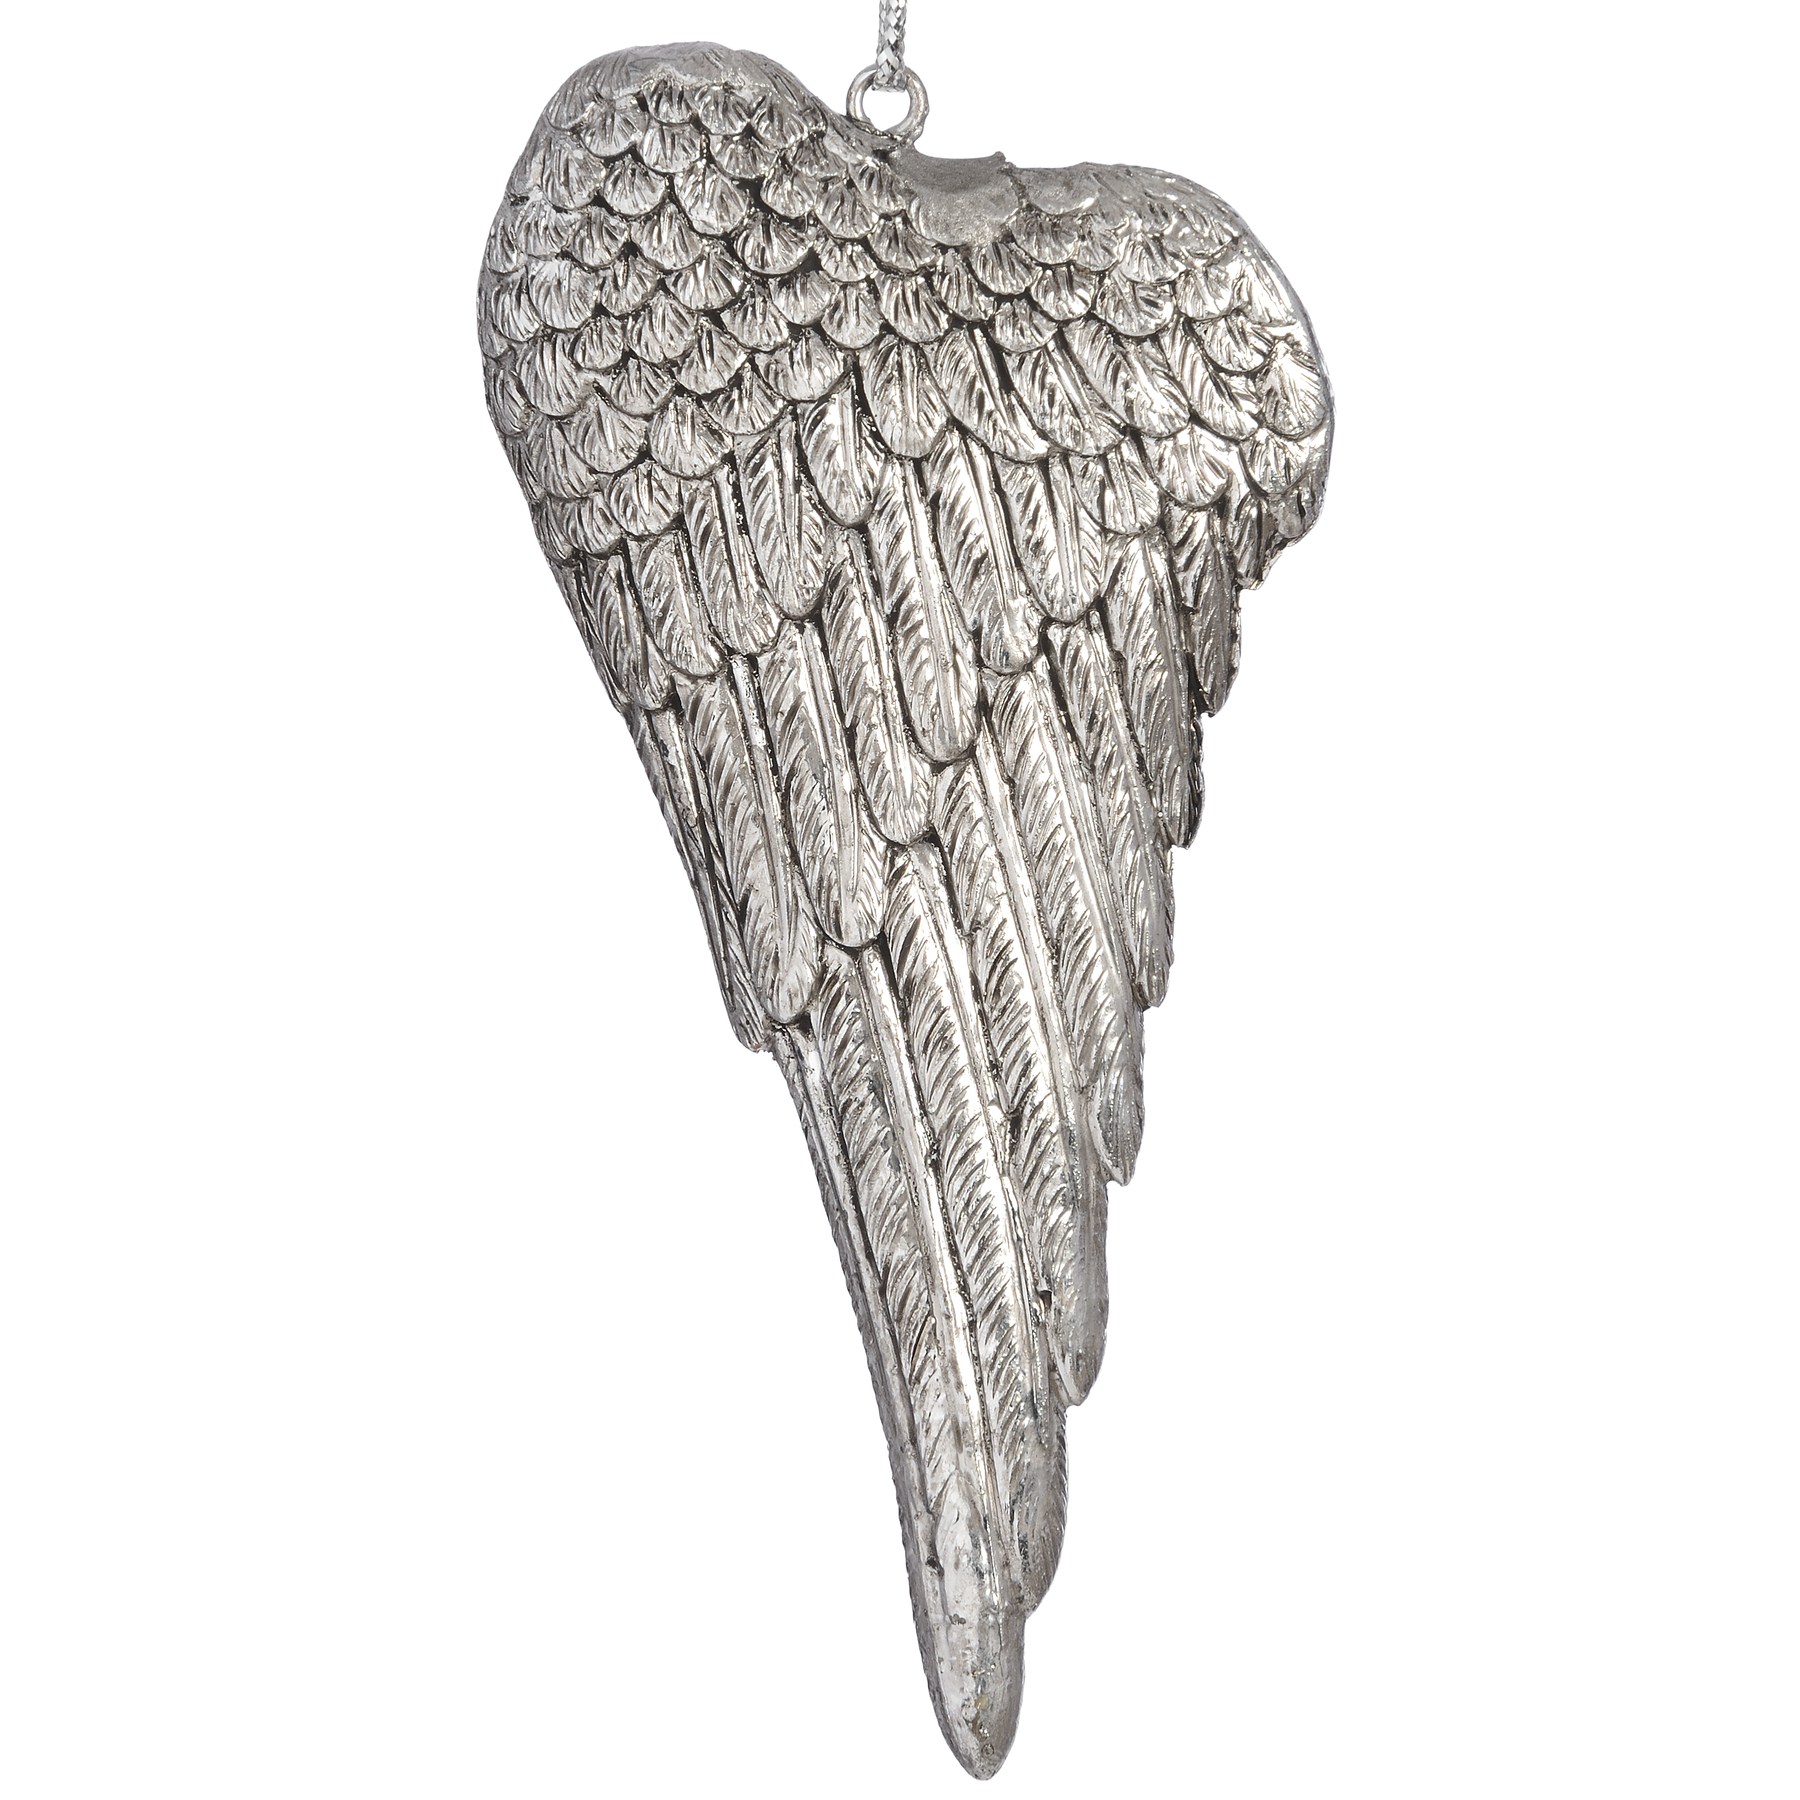 Silver Wing Hanging Ornament - Image 1